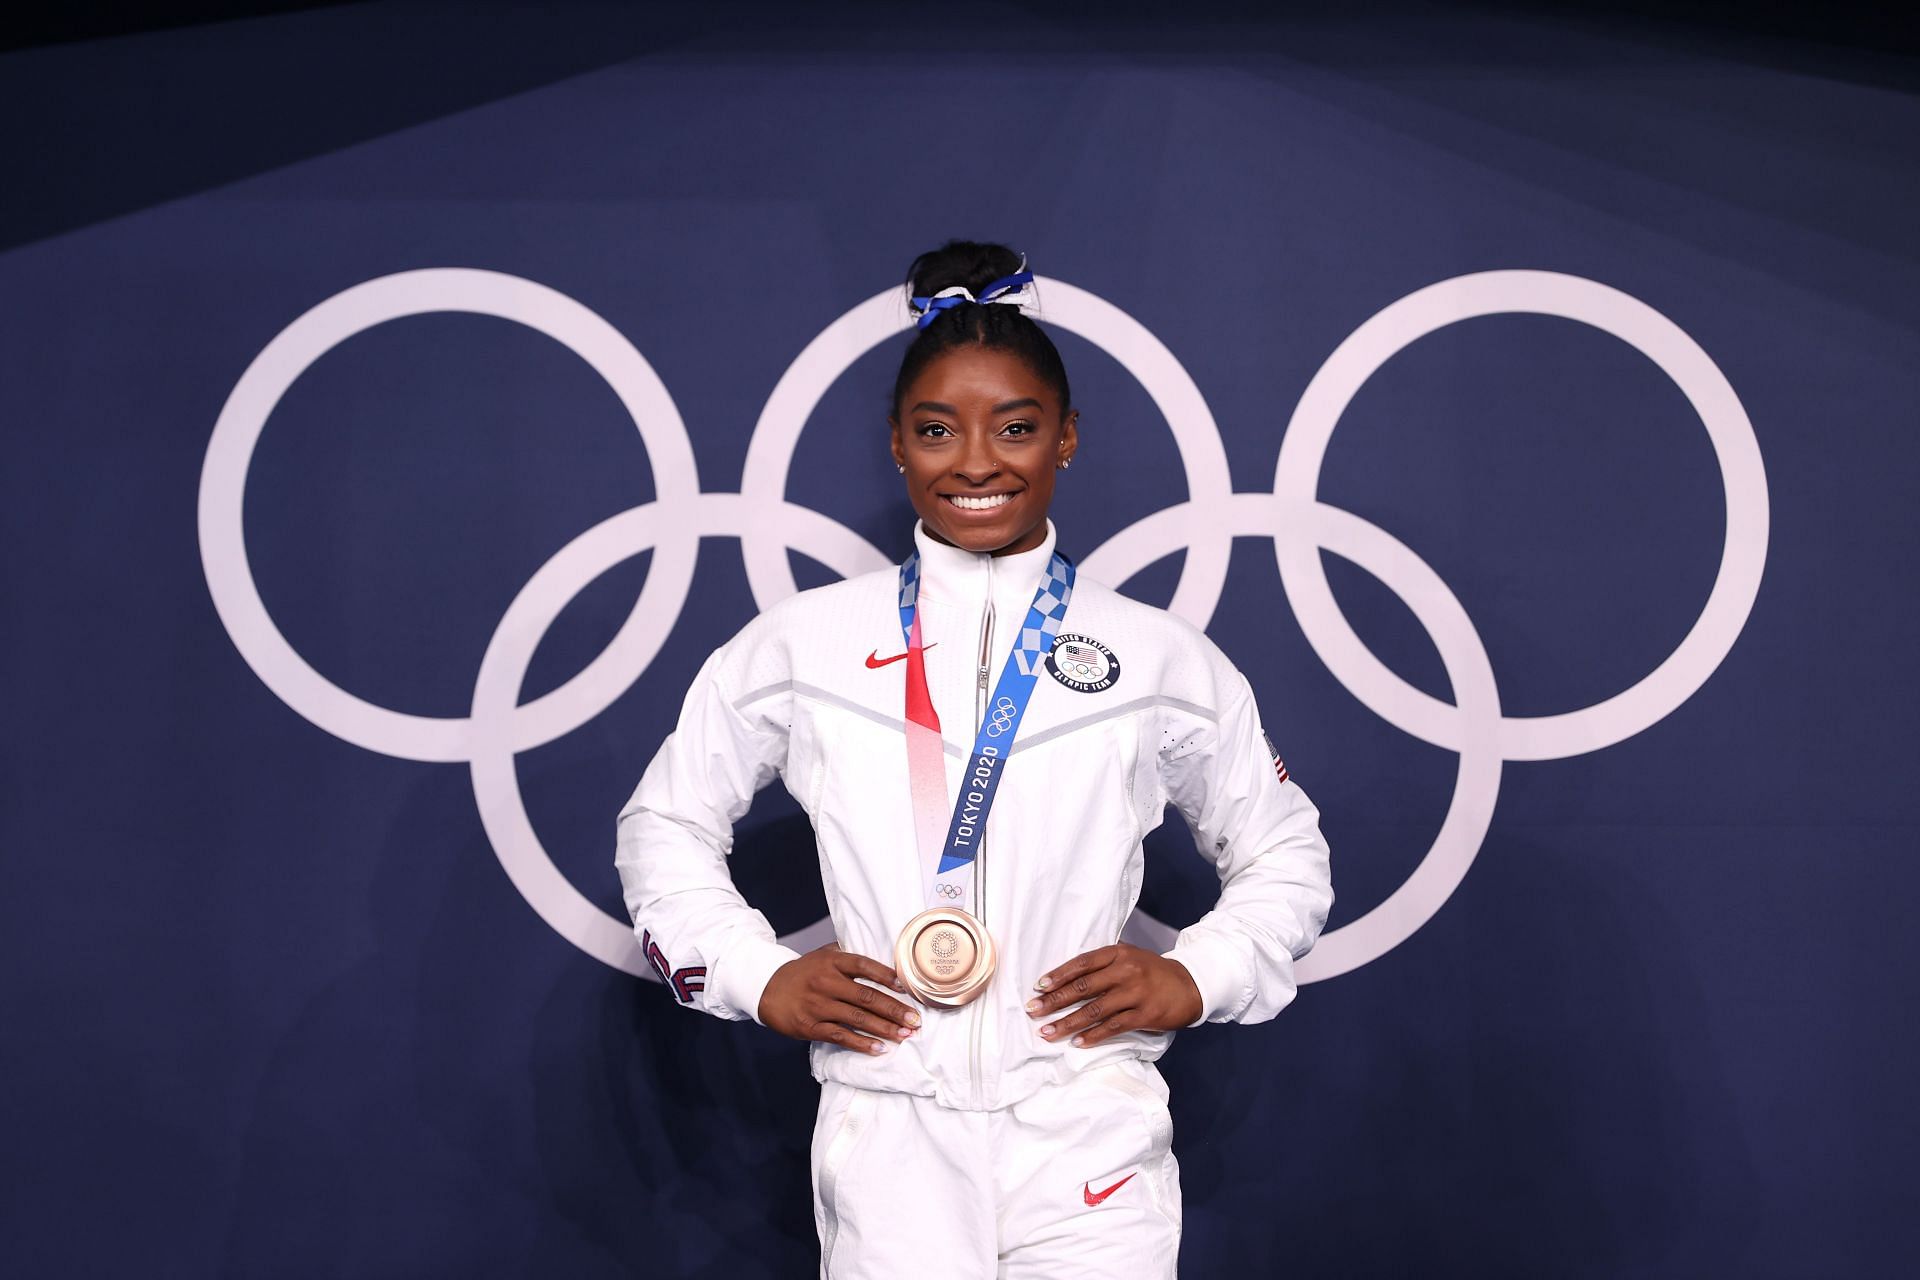 Simone Biles poses with the bronze medal at the 2020 Tokyo Olympics